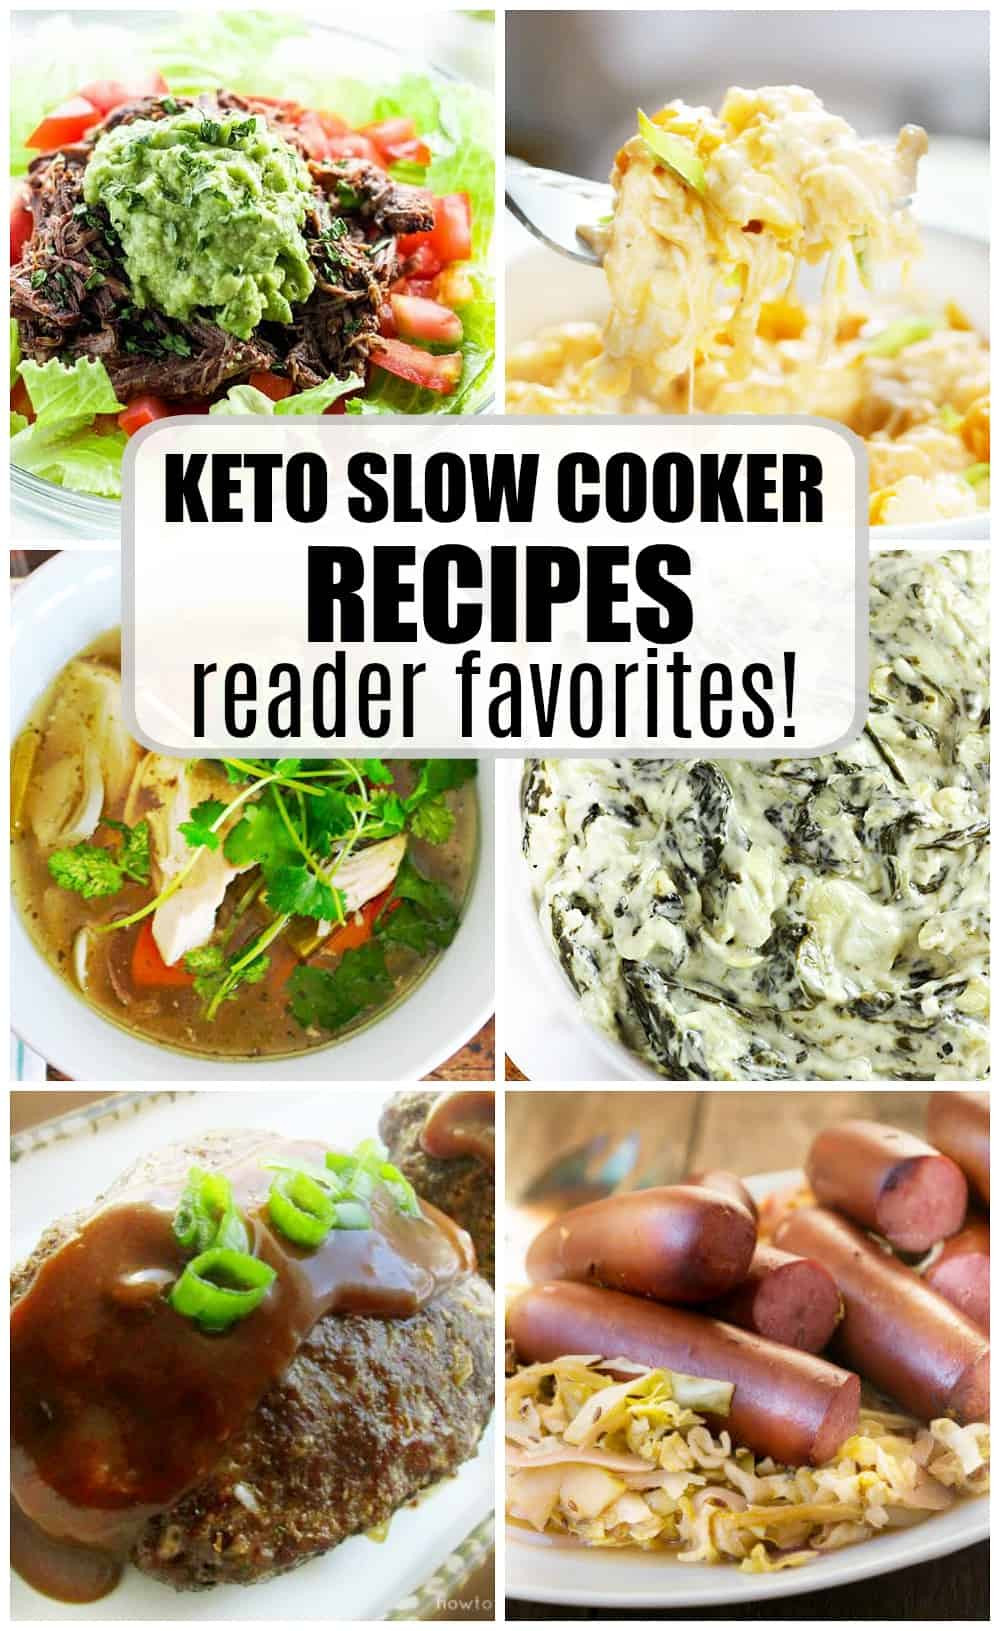 Crockpot Keto Recipes Slow Cooker
 KETO Slow Cooker Recipes Low Carb High Fat Some of the Best